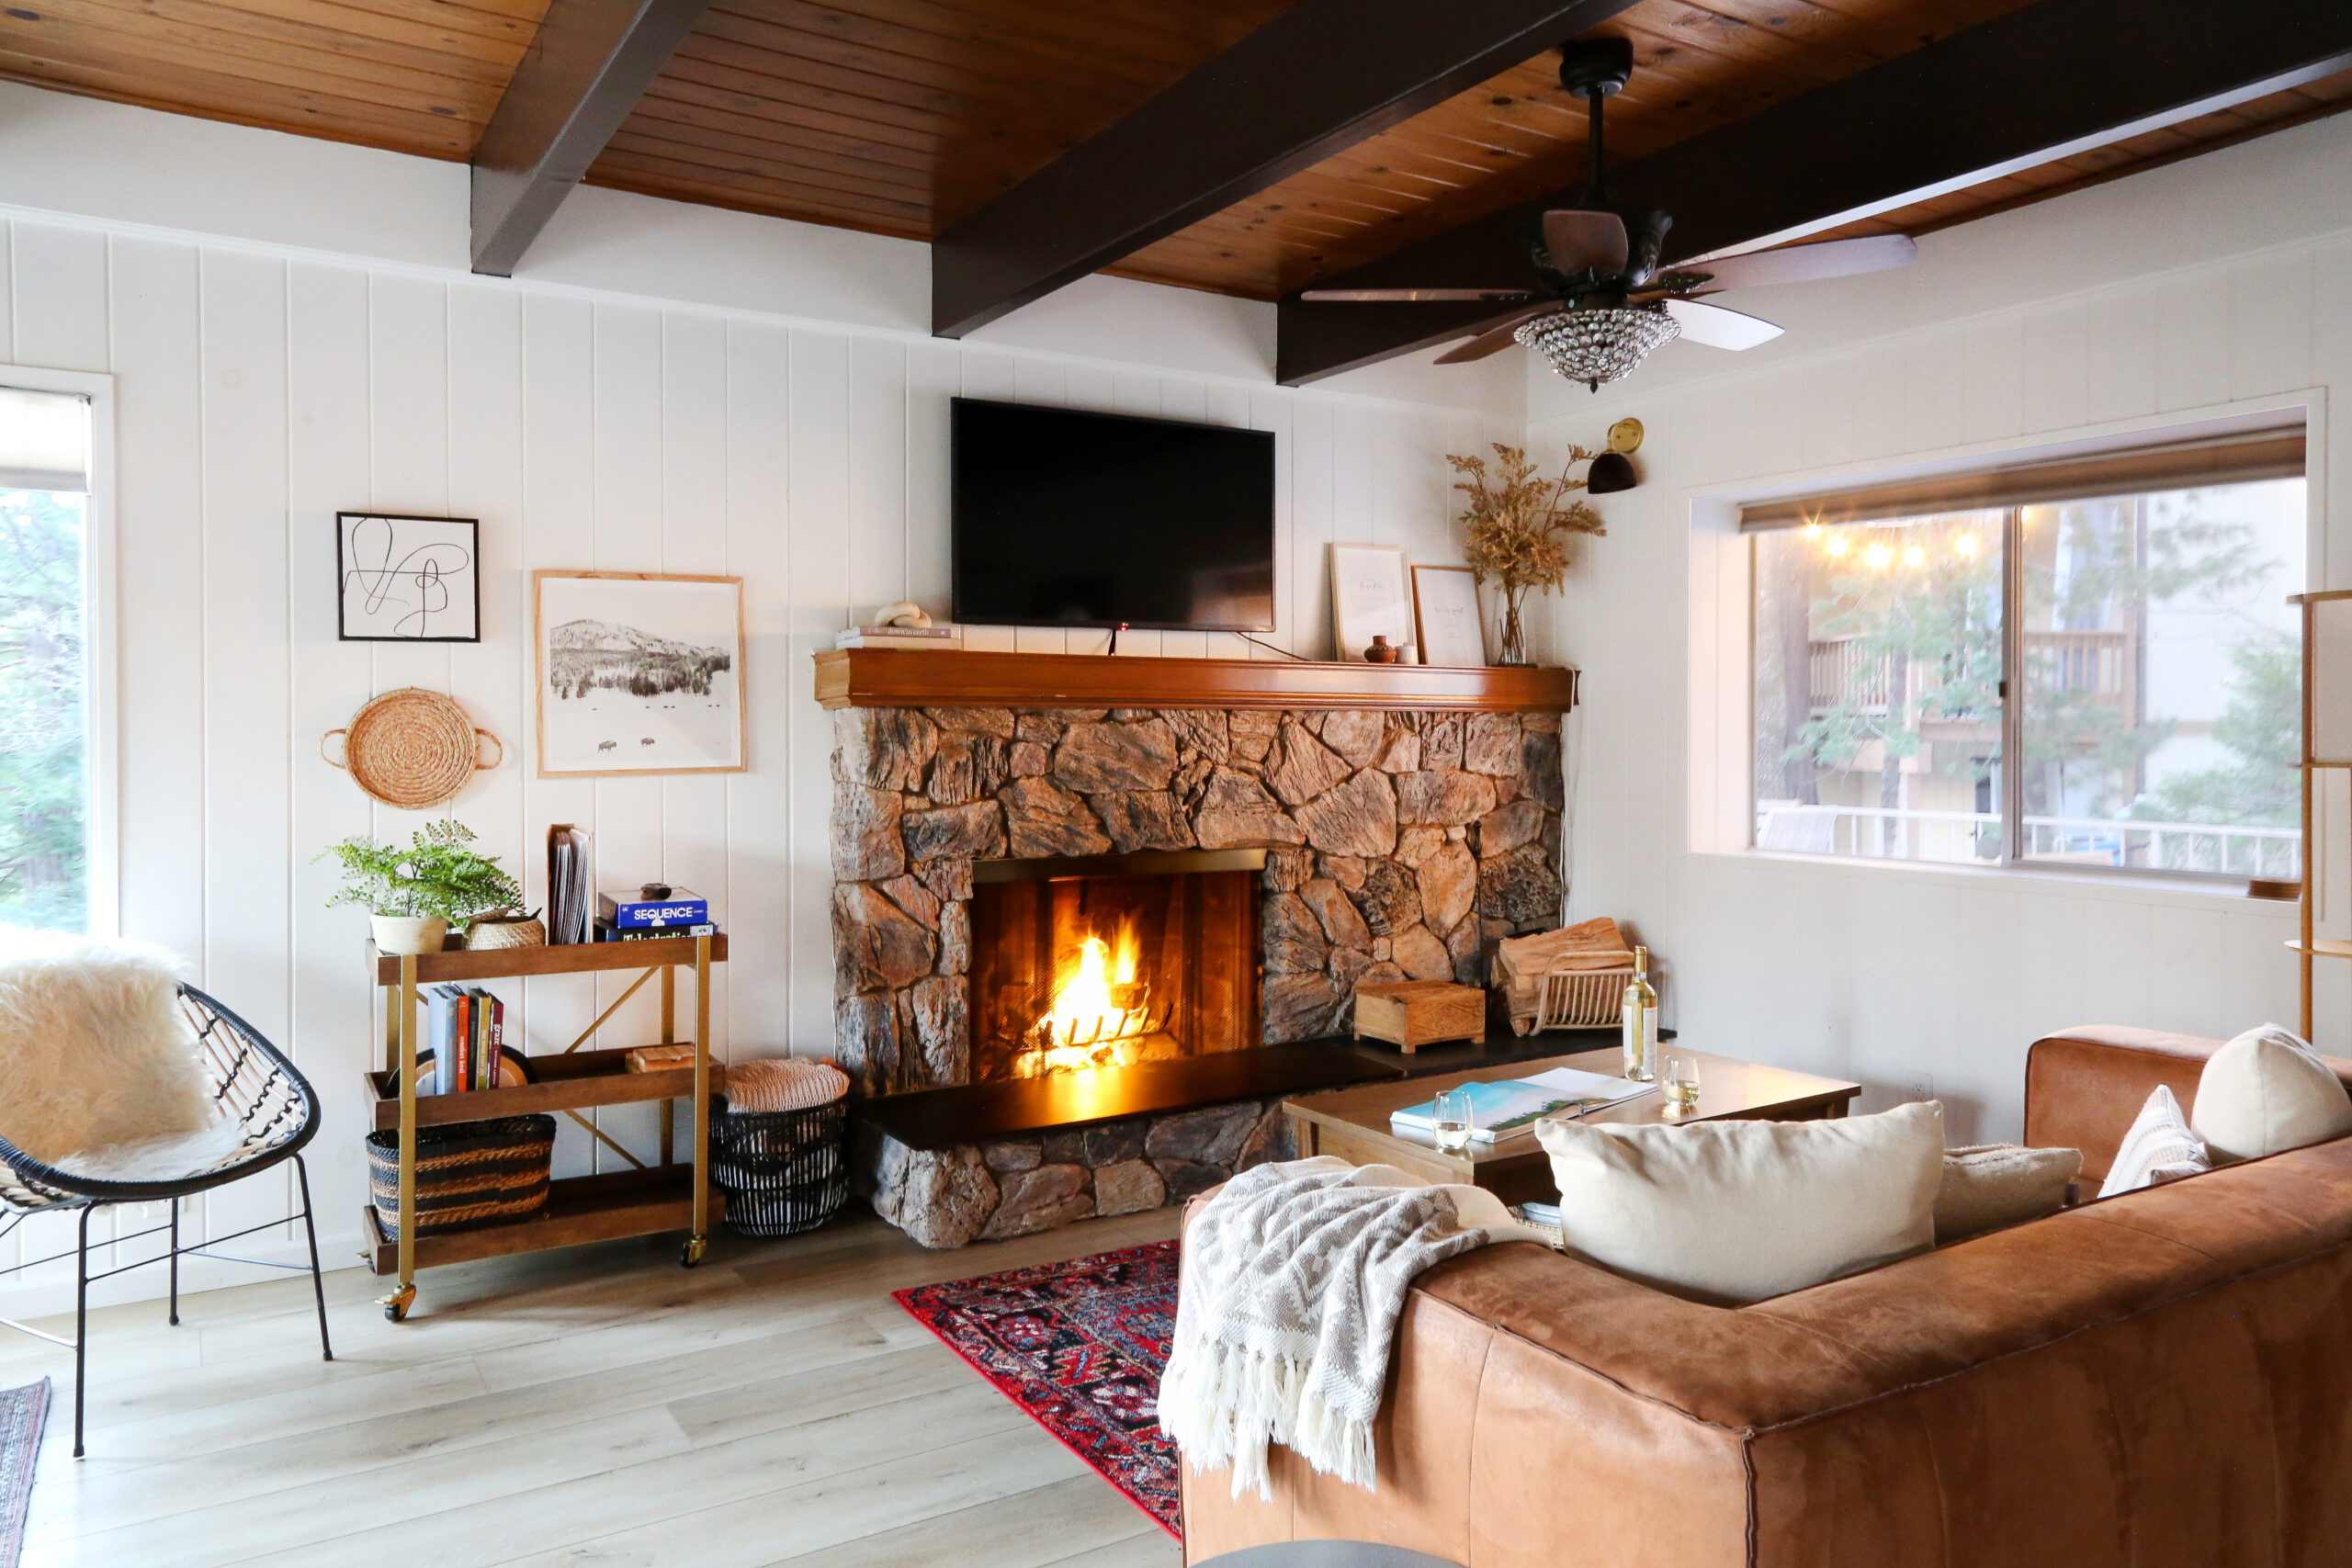 Living room with large stone fireplace at Casa Cabina AirBnb vacation rental in Lake Arrowhead, California.